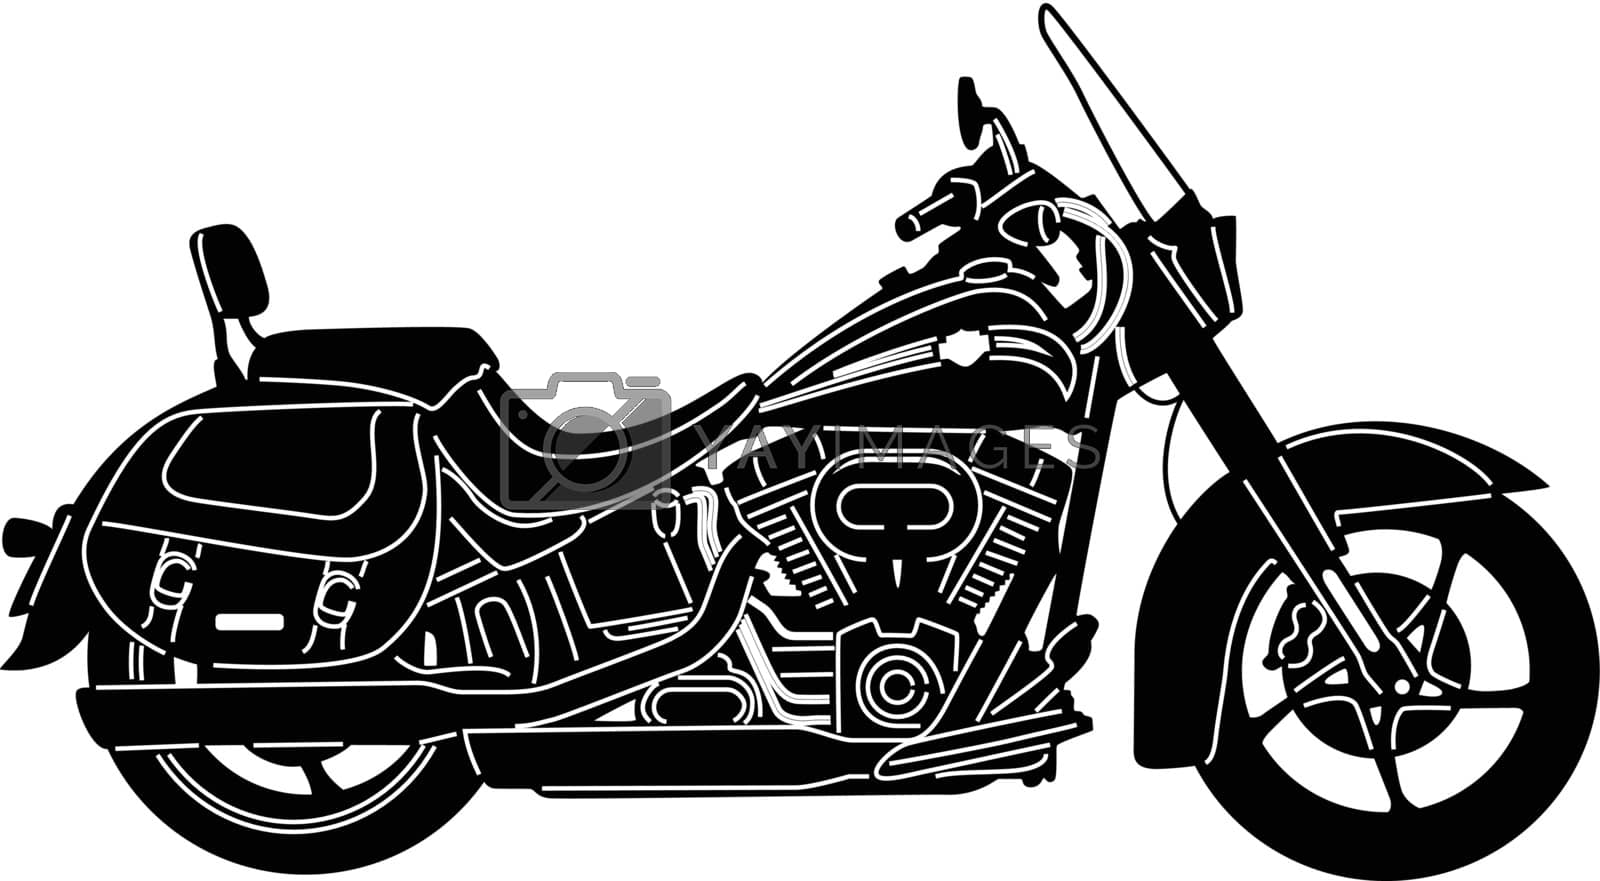 Royalty free image of Motorcycle Silhouette by silverrose1